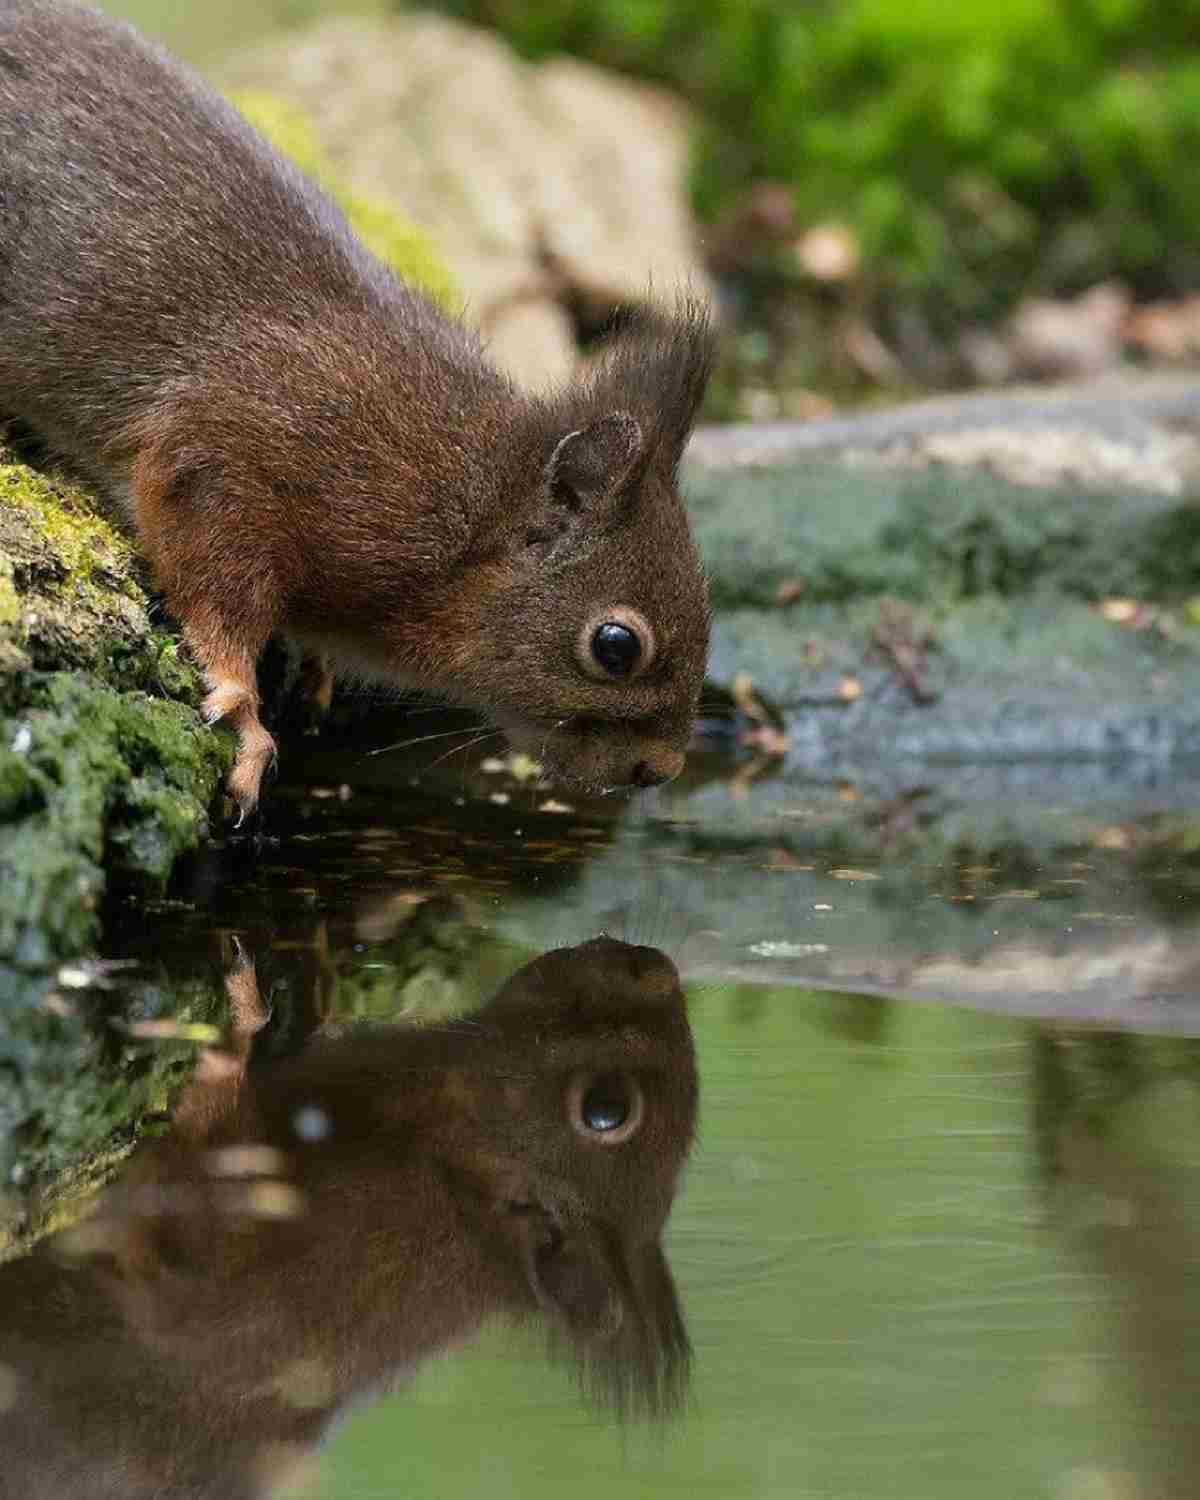 Niki Colomont 's photography project of Adorable Squirrels Admiring Themselves in Water will Make Humans Envious